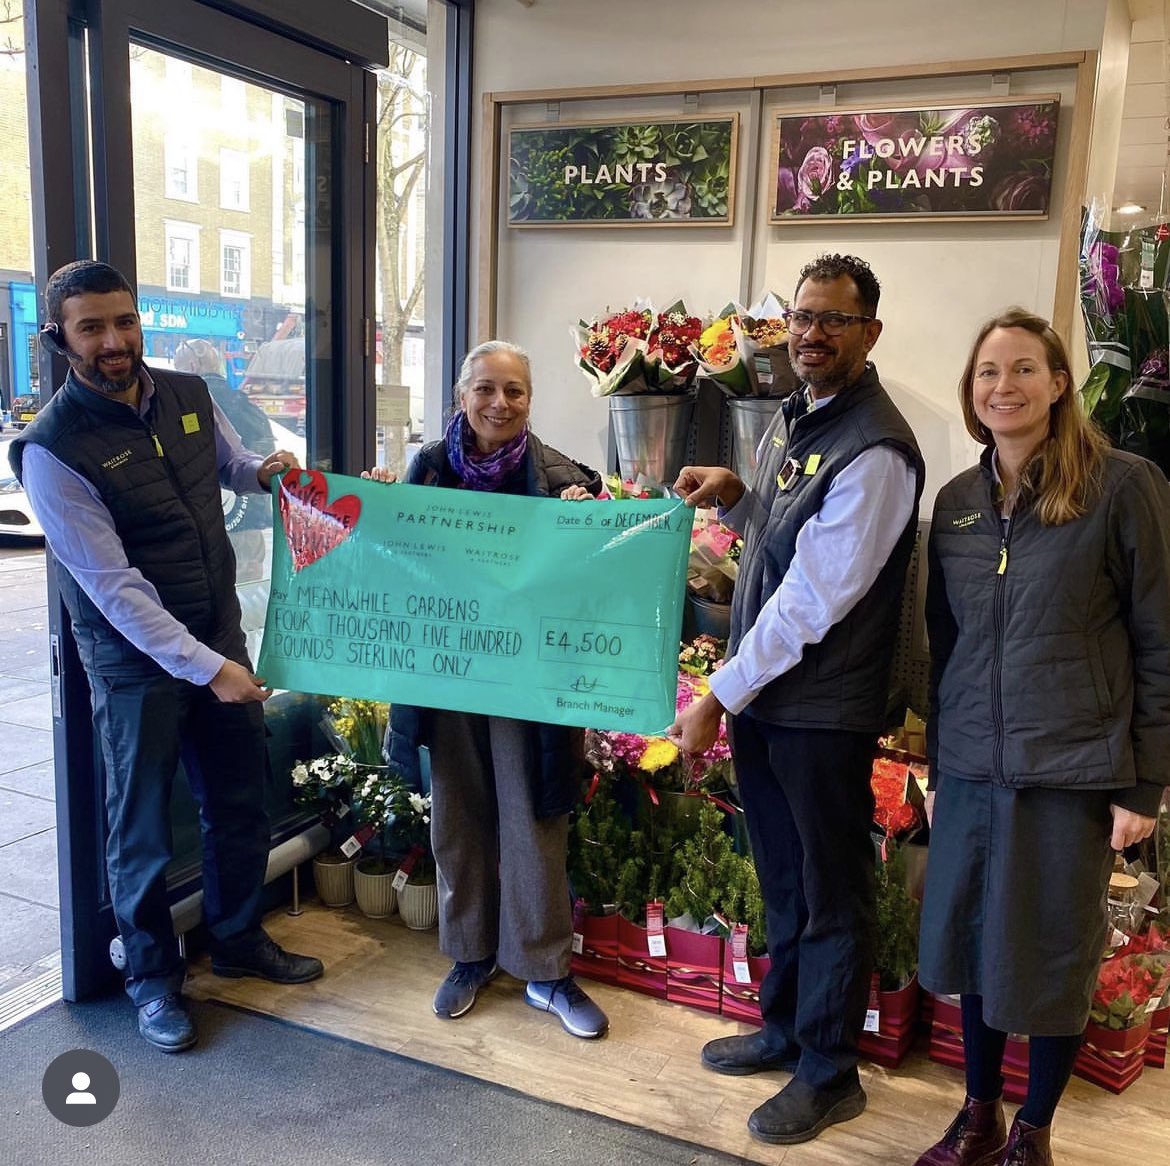 A massive thank you to @waitrose Notting Hill Gate for the donation to renovate our meeting room! It is very much needed and will ensure we can run our workshops etc in a much more pleasant environment 😊🌿 #communitygarden #northkensington #workshops #localcommunity